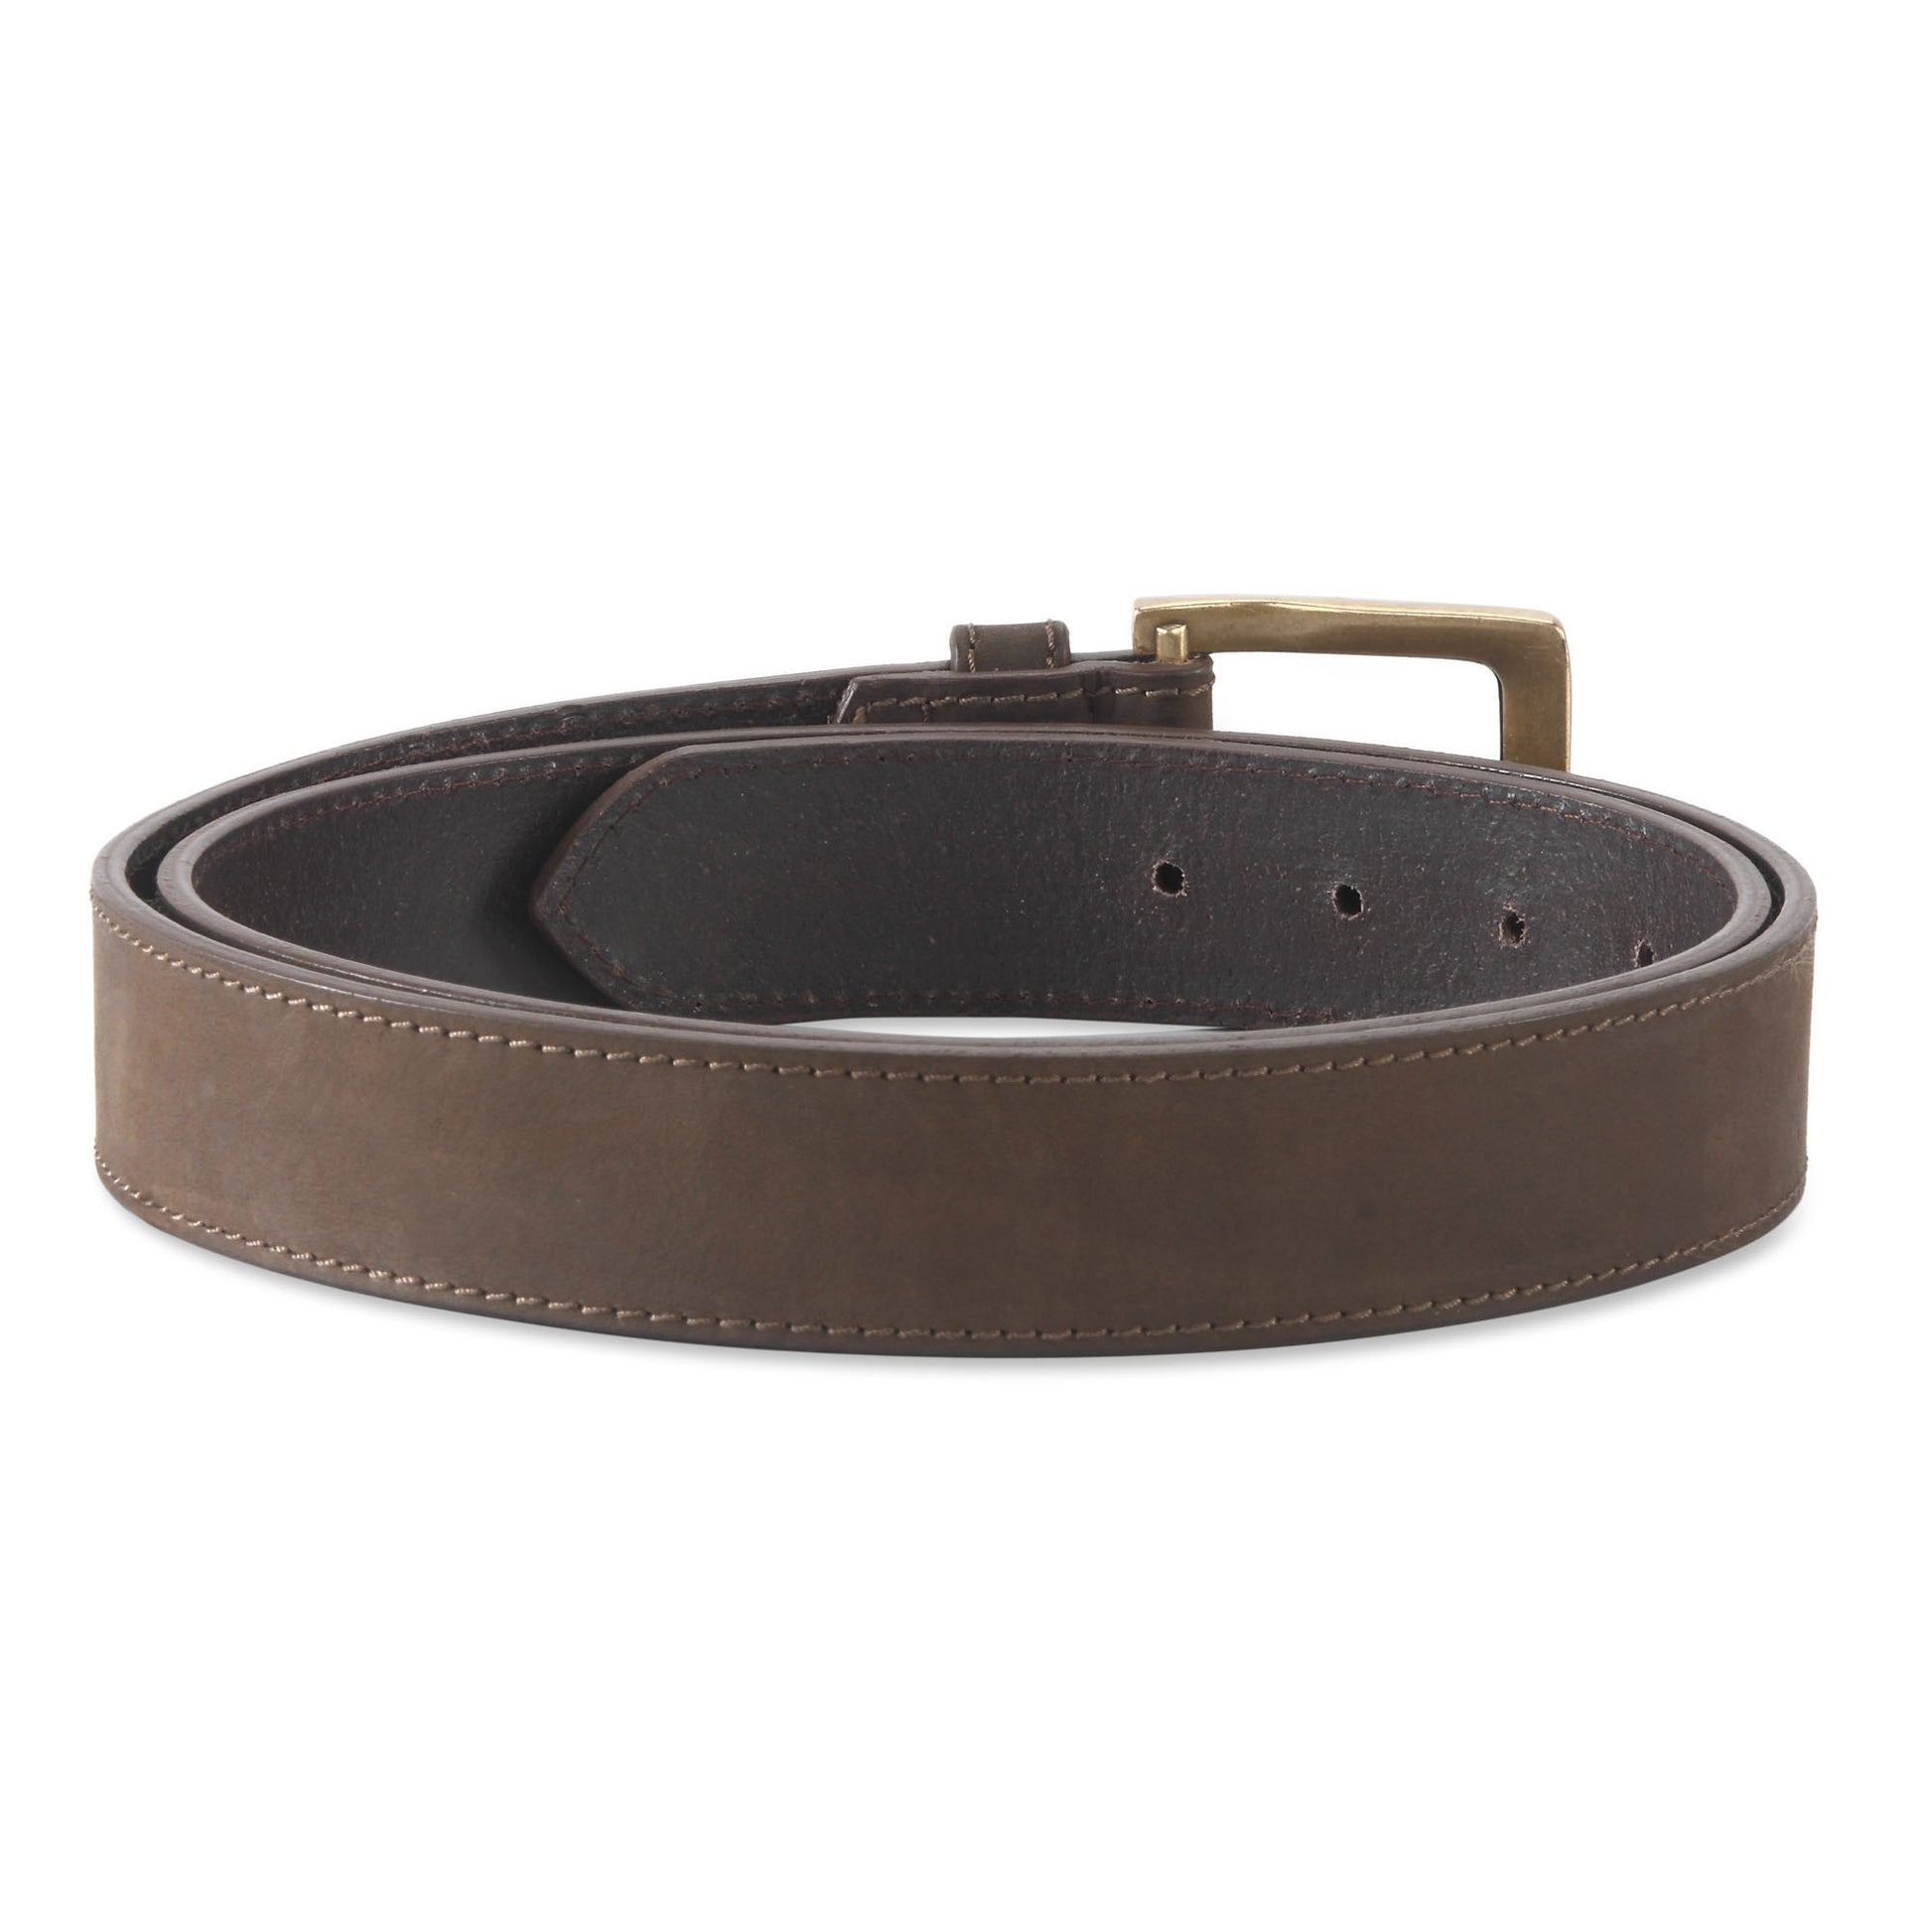 392702 - one and a half inch wide leather belt in dark chocolate brown color top grain hunter leather - back view